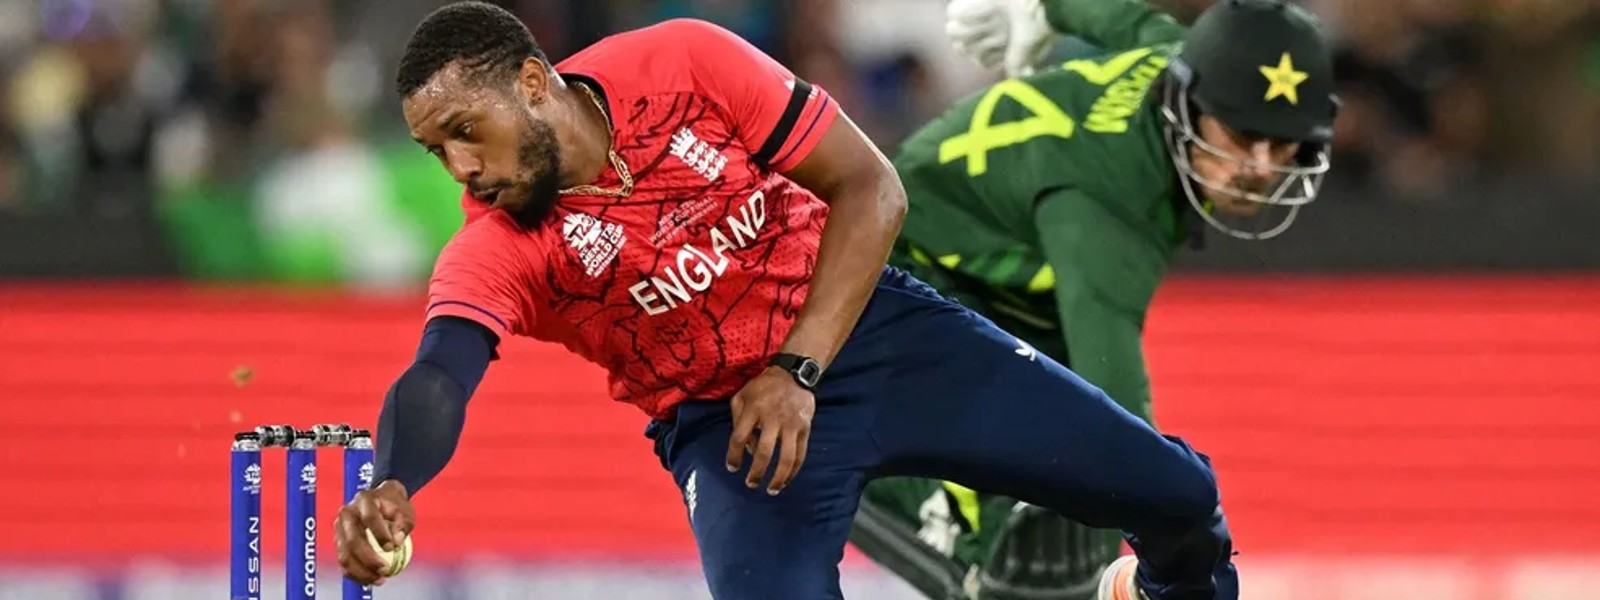 England on top as Pakistan restricted to 137/8